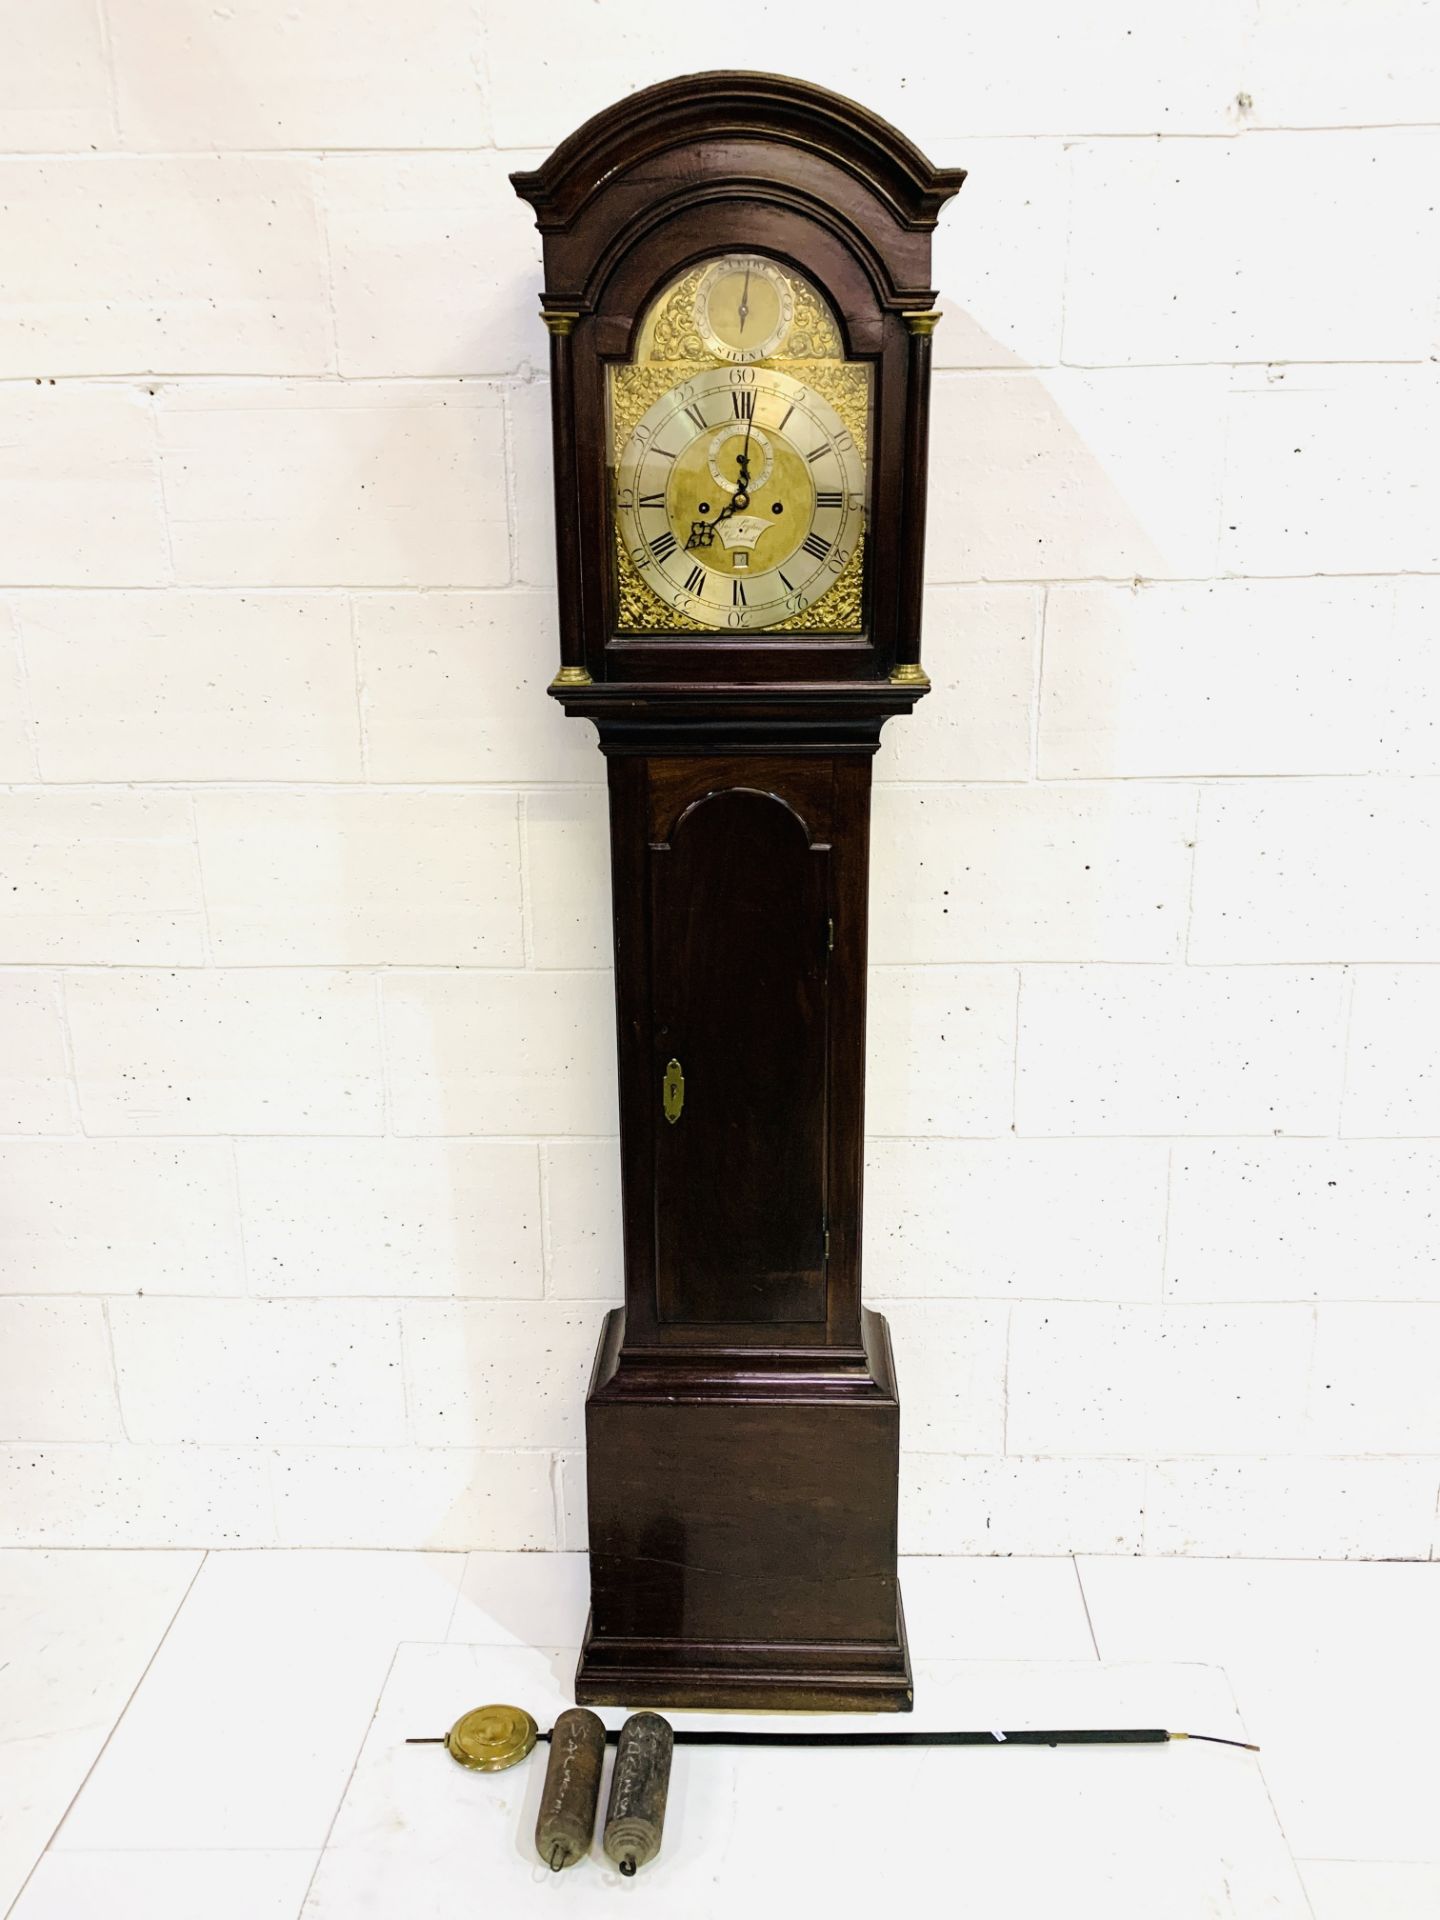 Mahogany long case clock with columned and arched hood by Jos. Leyton of Portsmouth